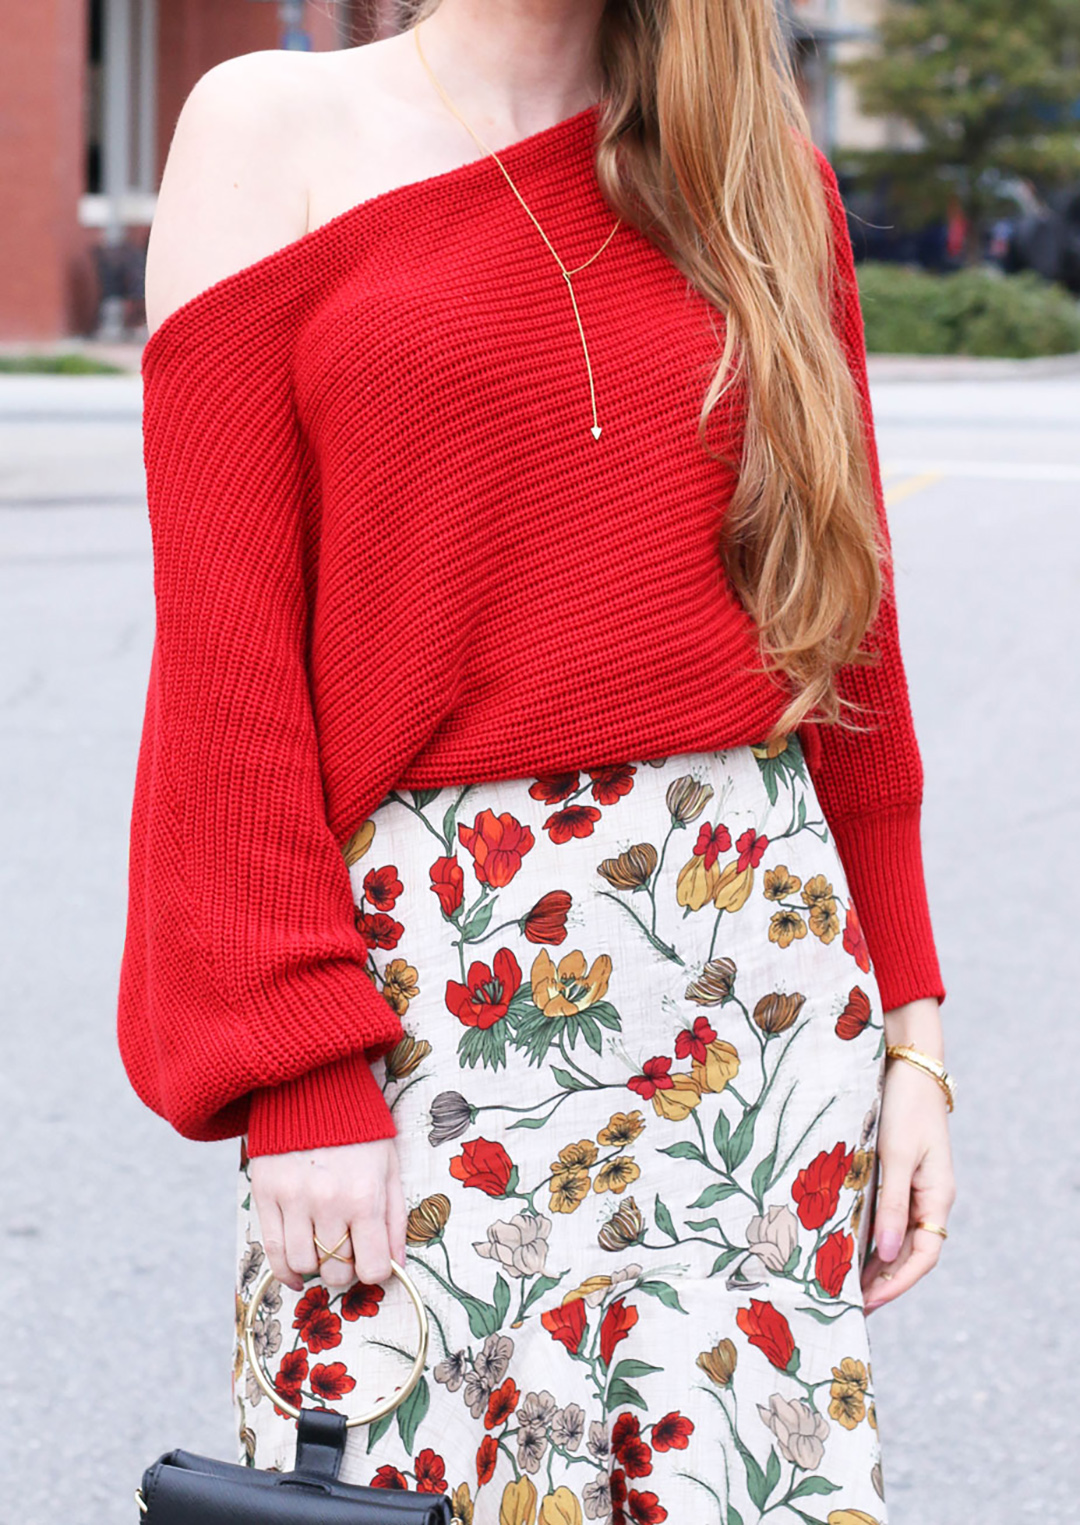 Cozy Off The Shoulder Sweater. Midi Skirt. Floral Skirt. Fall Style. Christmas sweater. Thanksgiving outfit. Holiday style. Black booties. Ring bag. Chunky sweater.